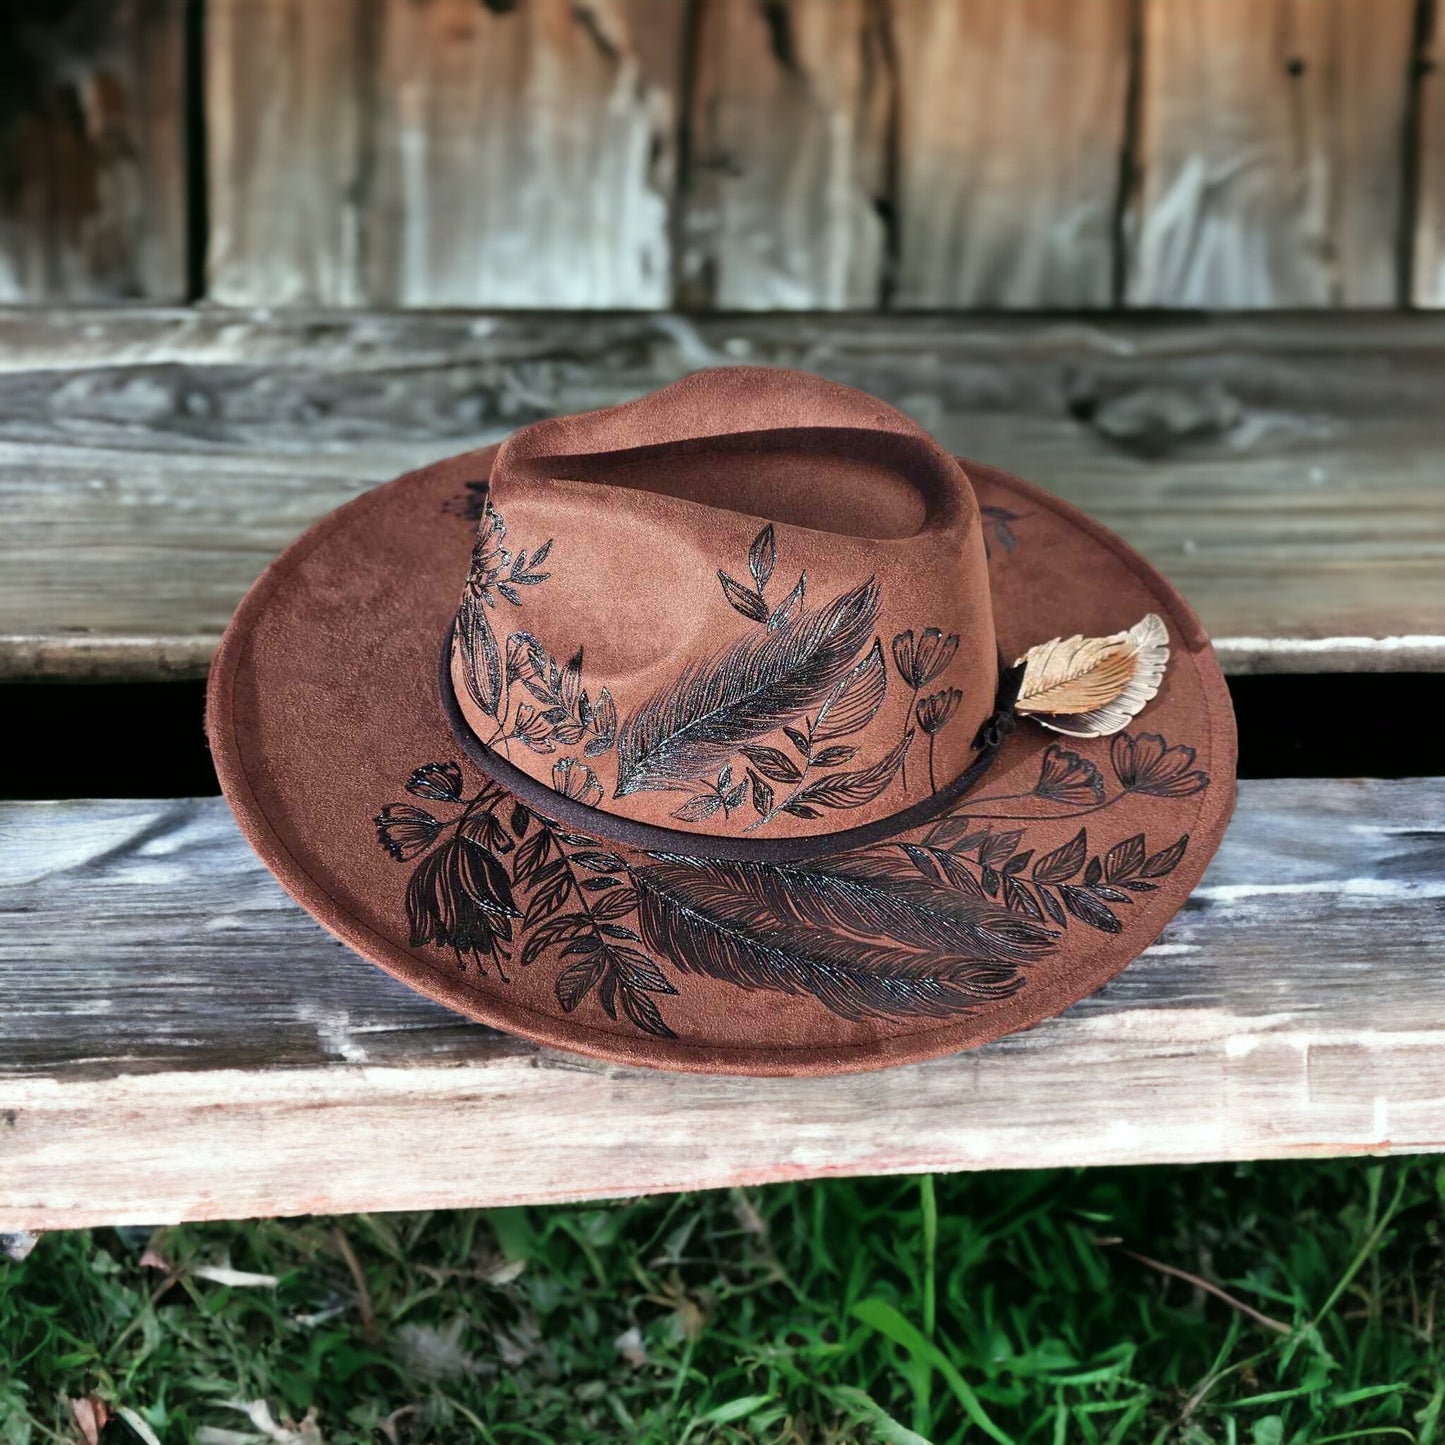 Dixie-Wide Brim Burned Hat with Matching Earrings - SET